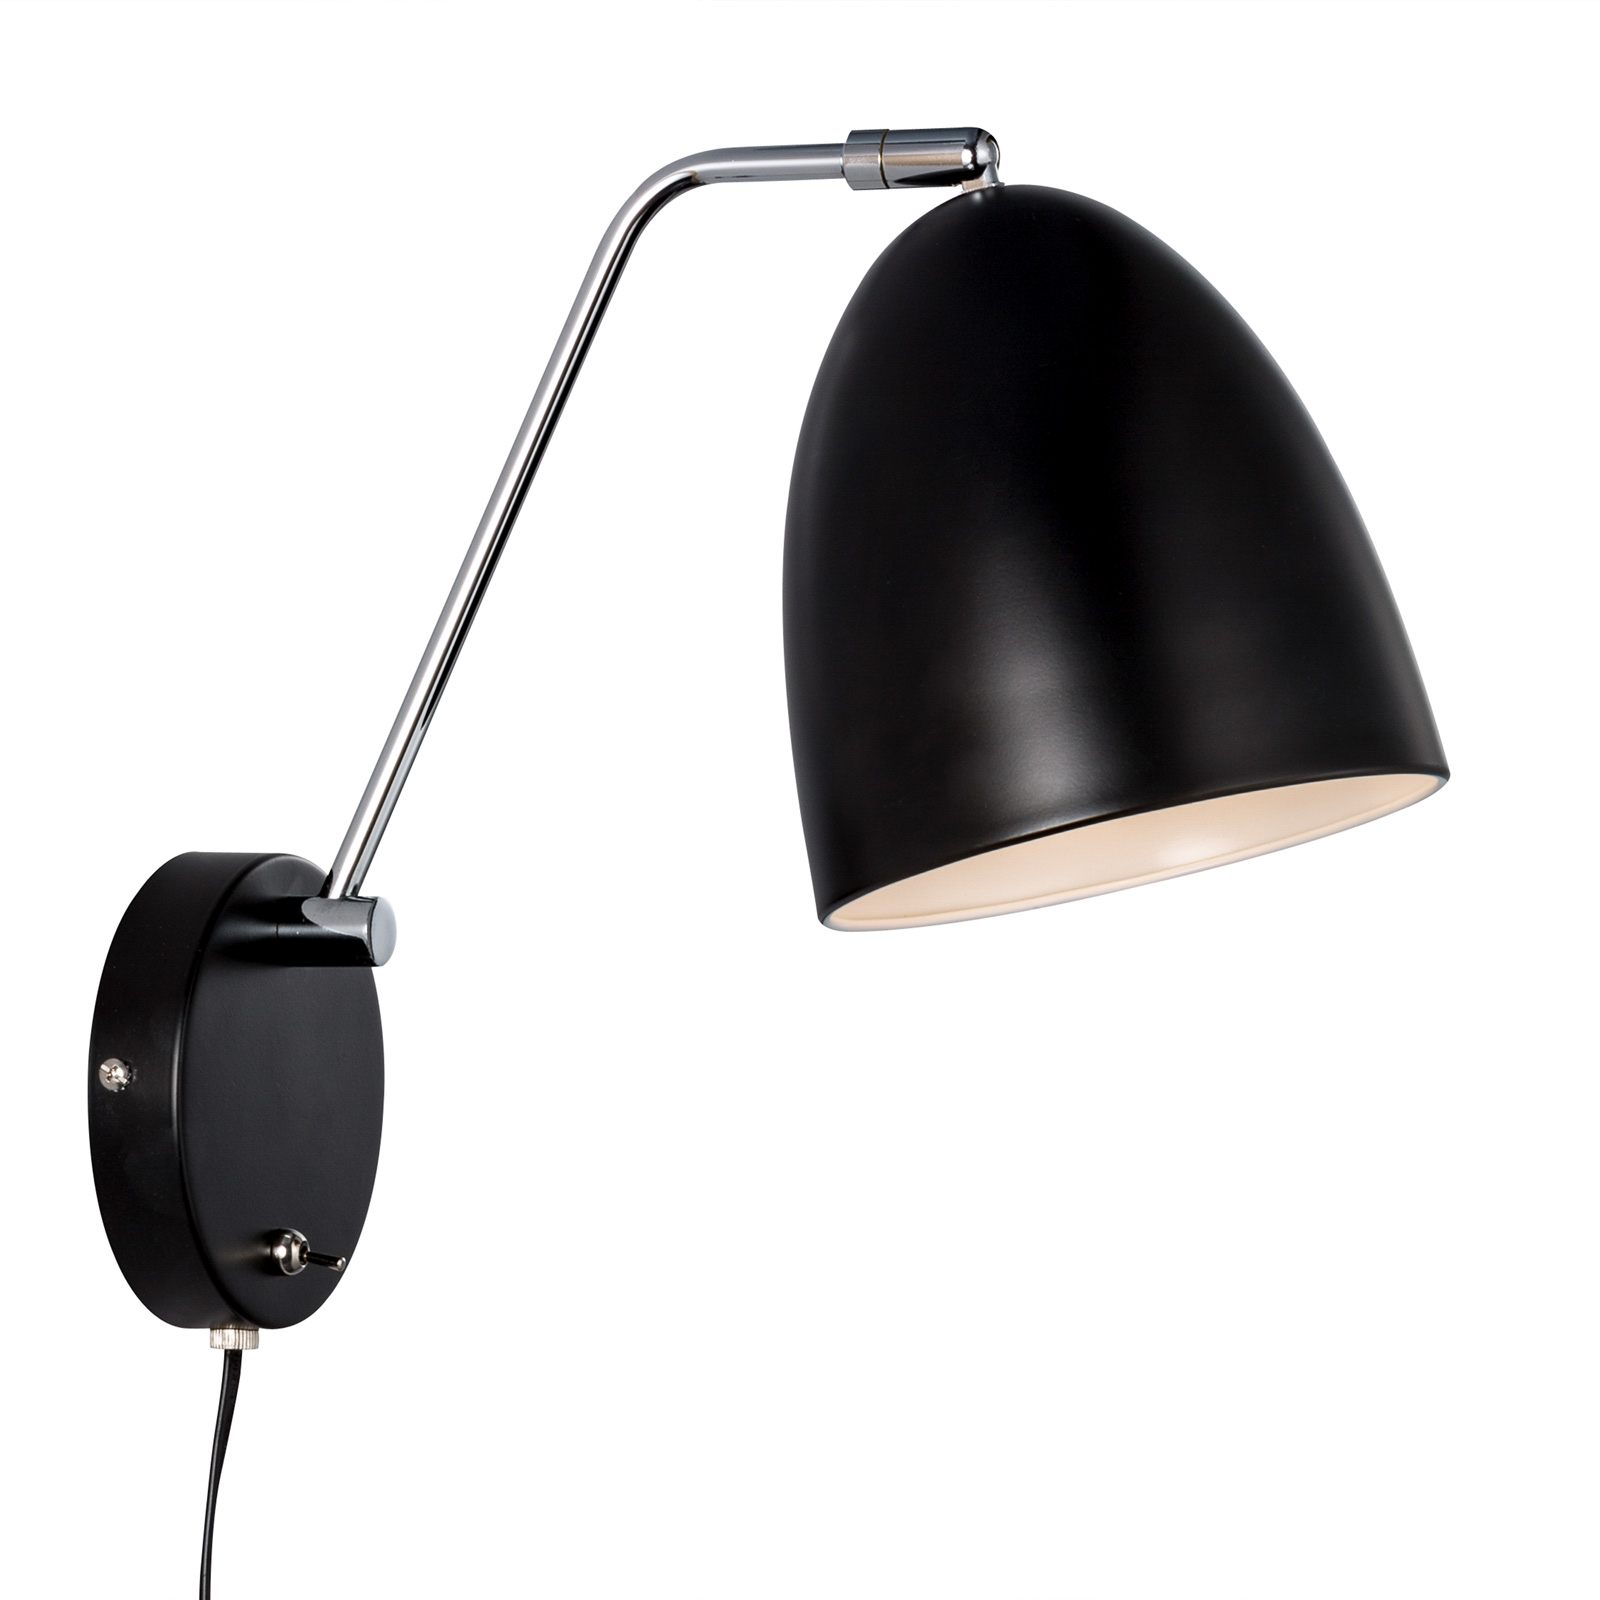 Alexander wall lamp with cable and plug, black